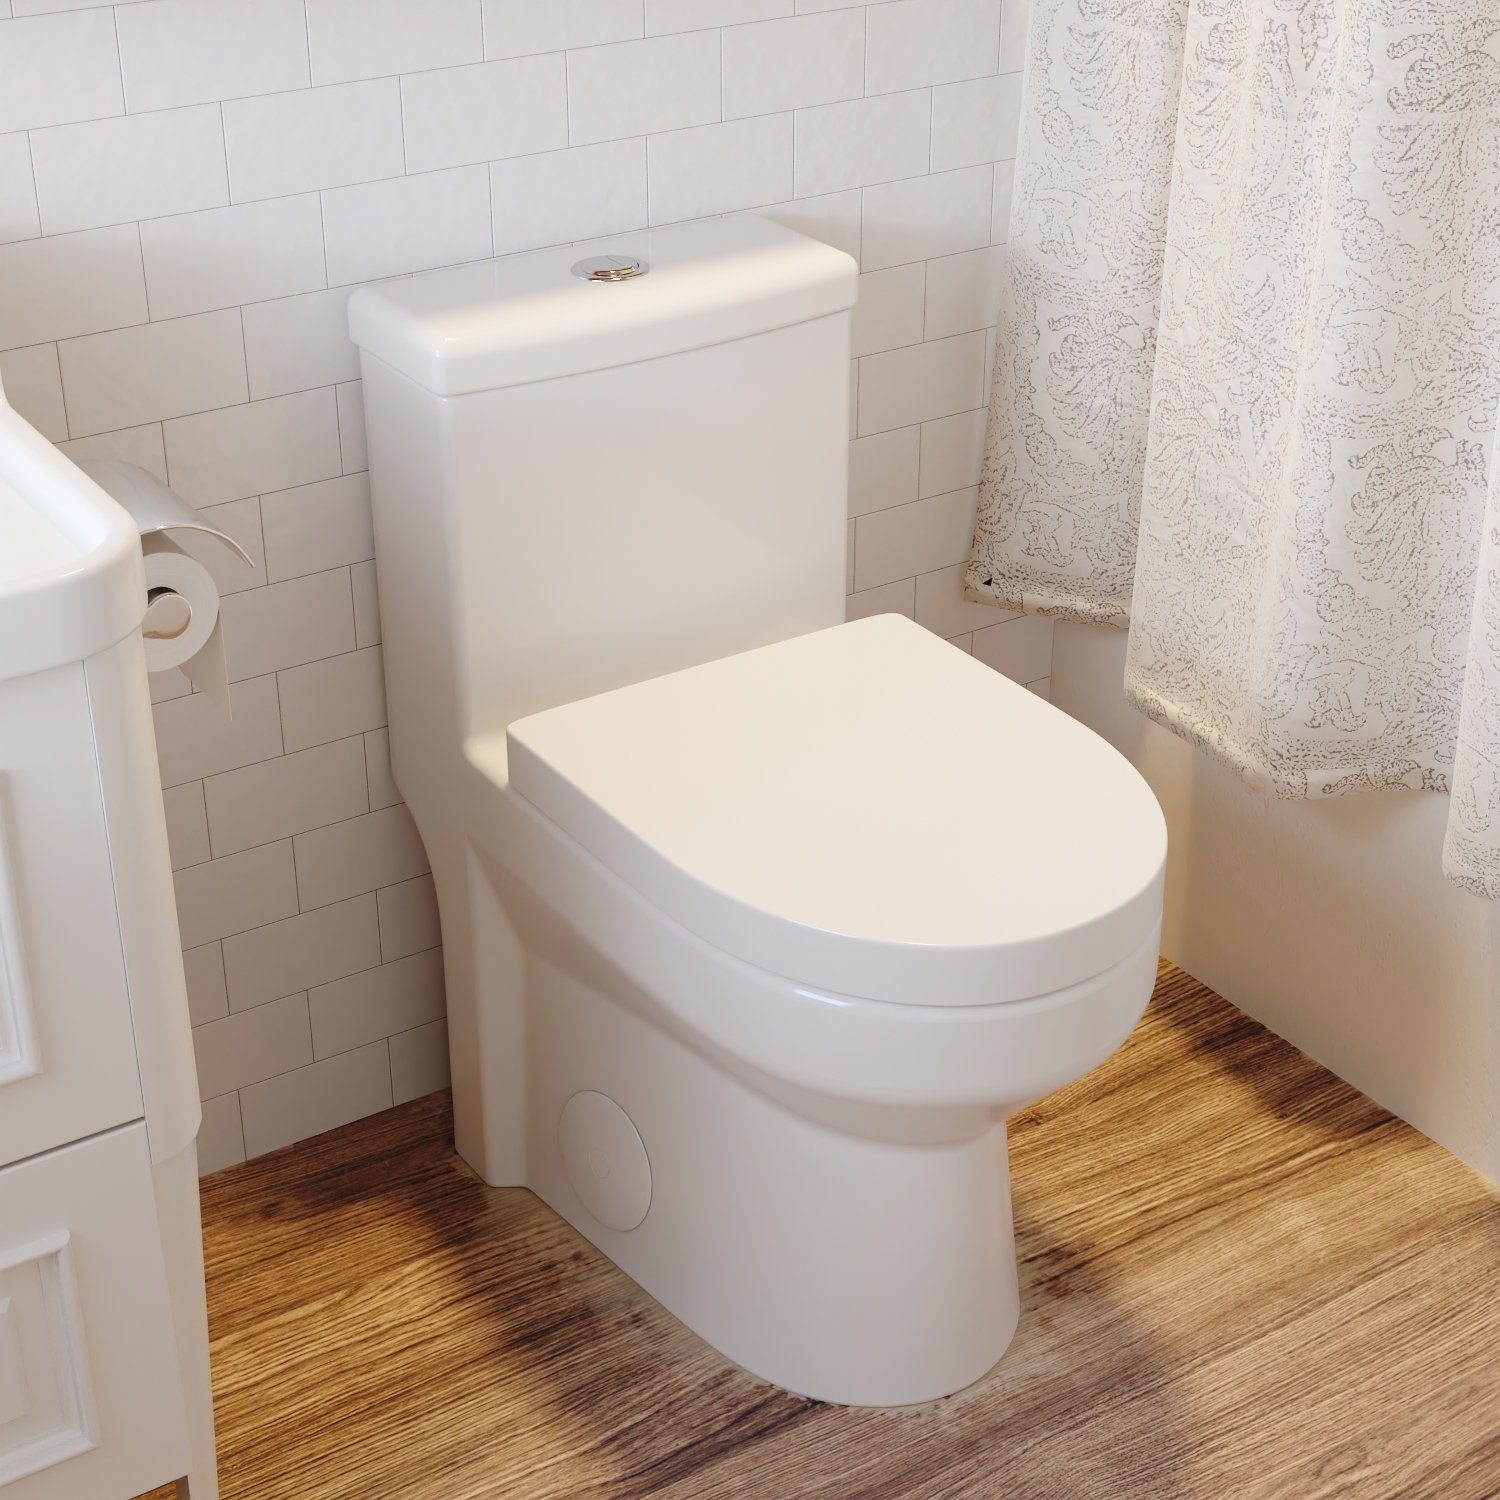 Liberty Dual-Flush Round One-Piece Toilet (Seat Included)